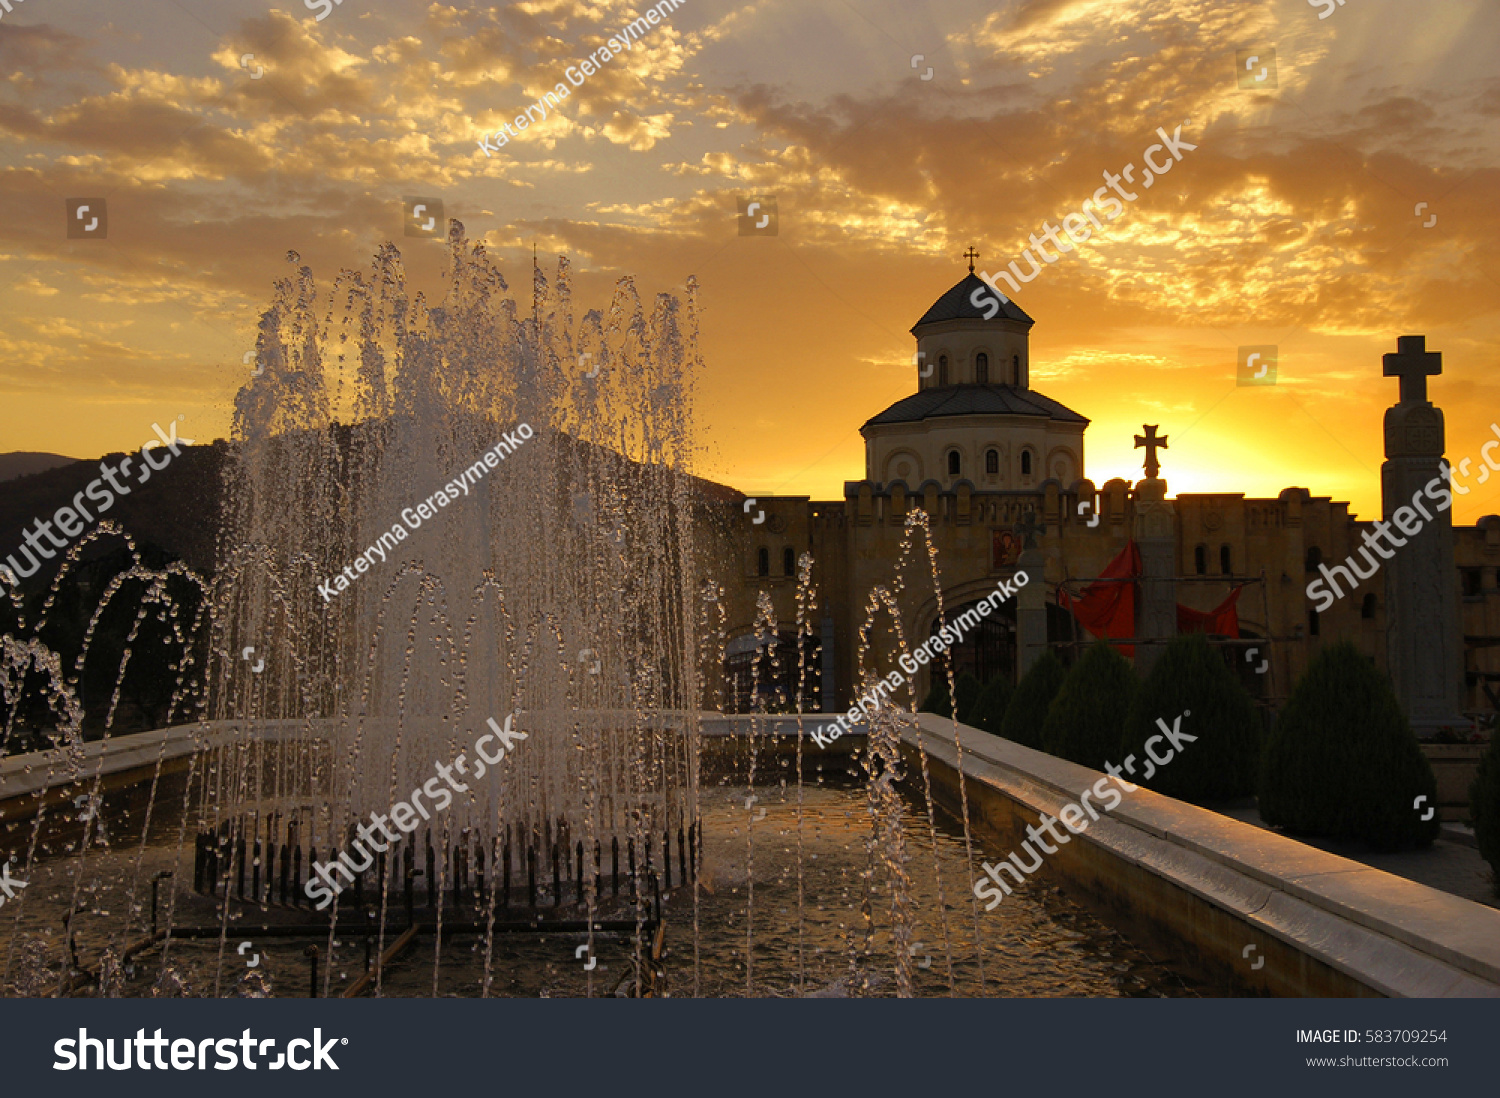 Fountain in the Holy Trinity Cathedral at sunset, Tbilisi, Georgia #583709254